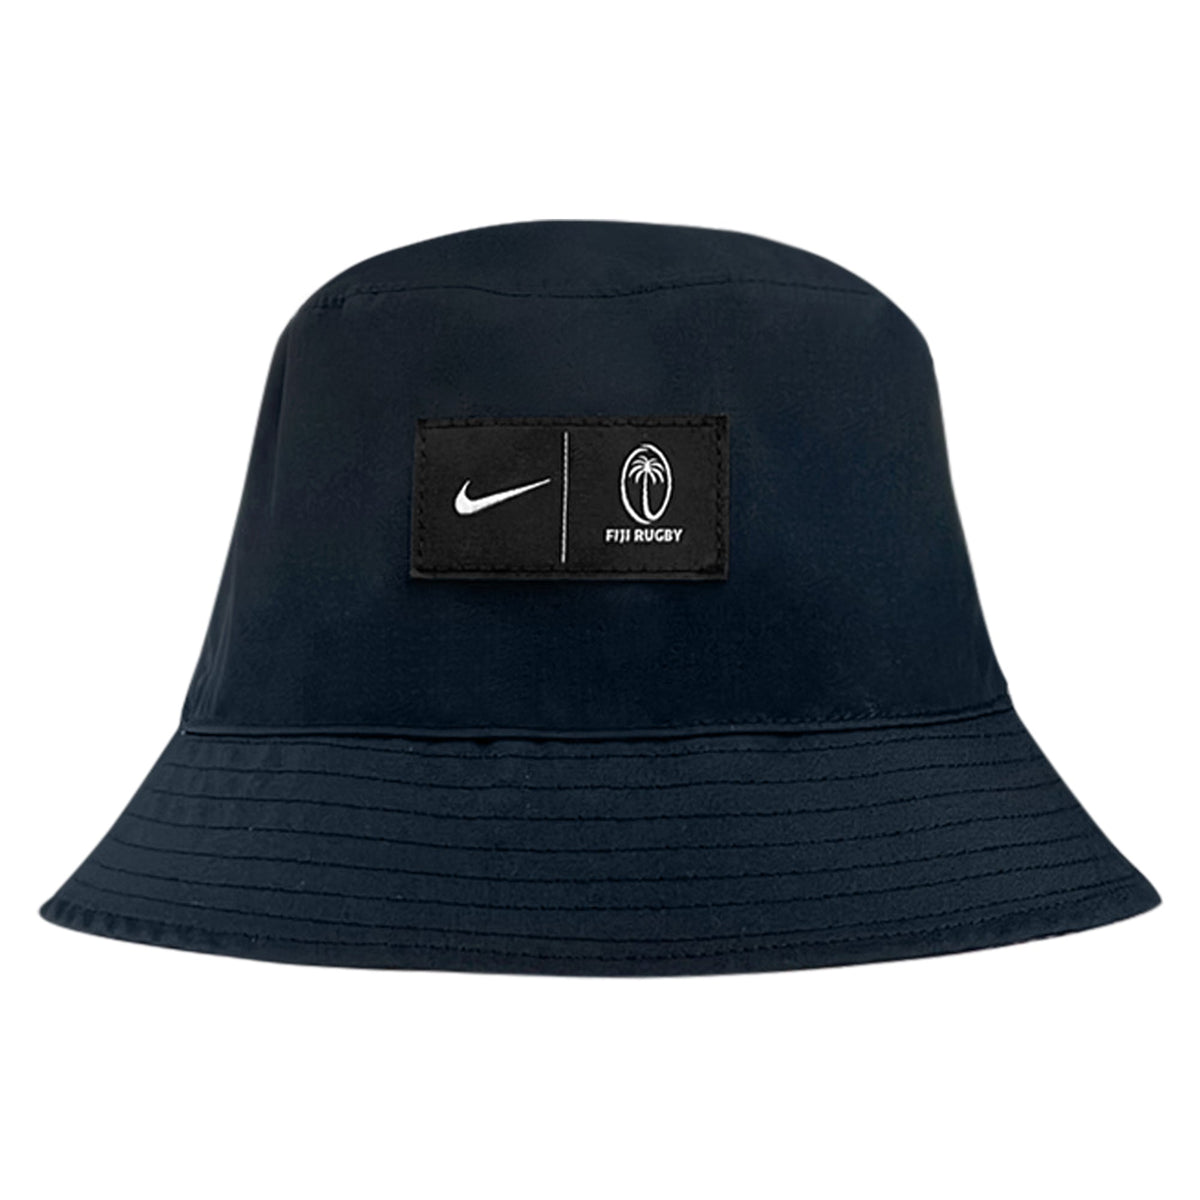 Fiji Rugby Hat | Reversible Polyester Bucket Hat 23/24 by Nike - Black ...